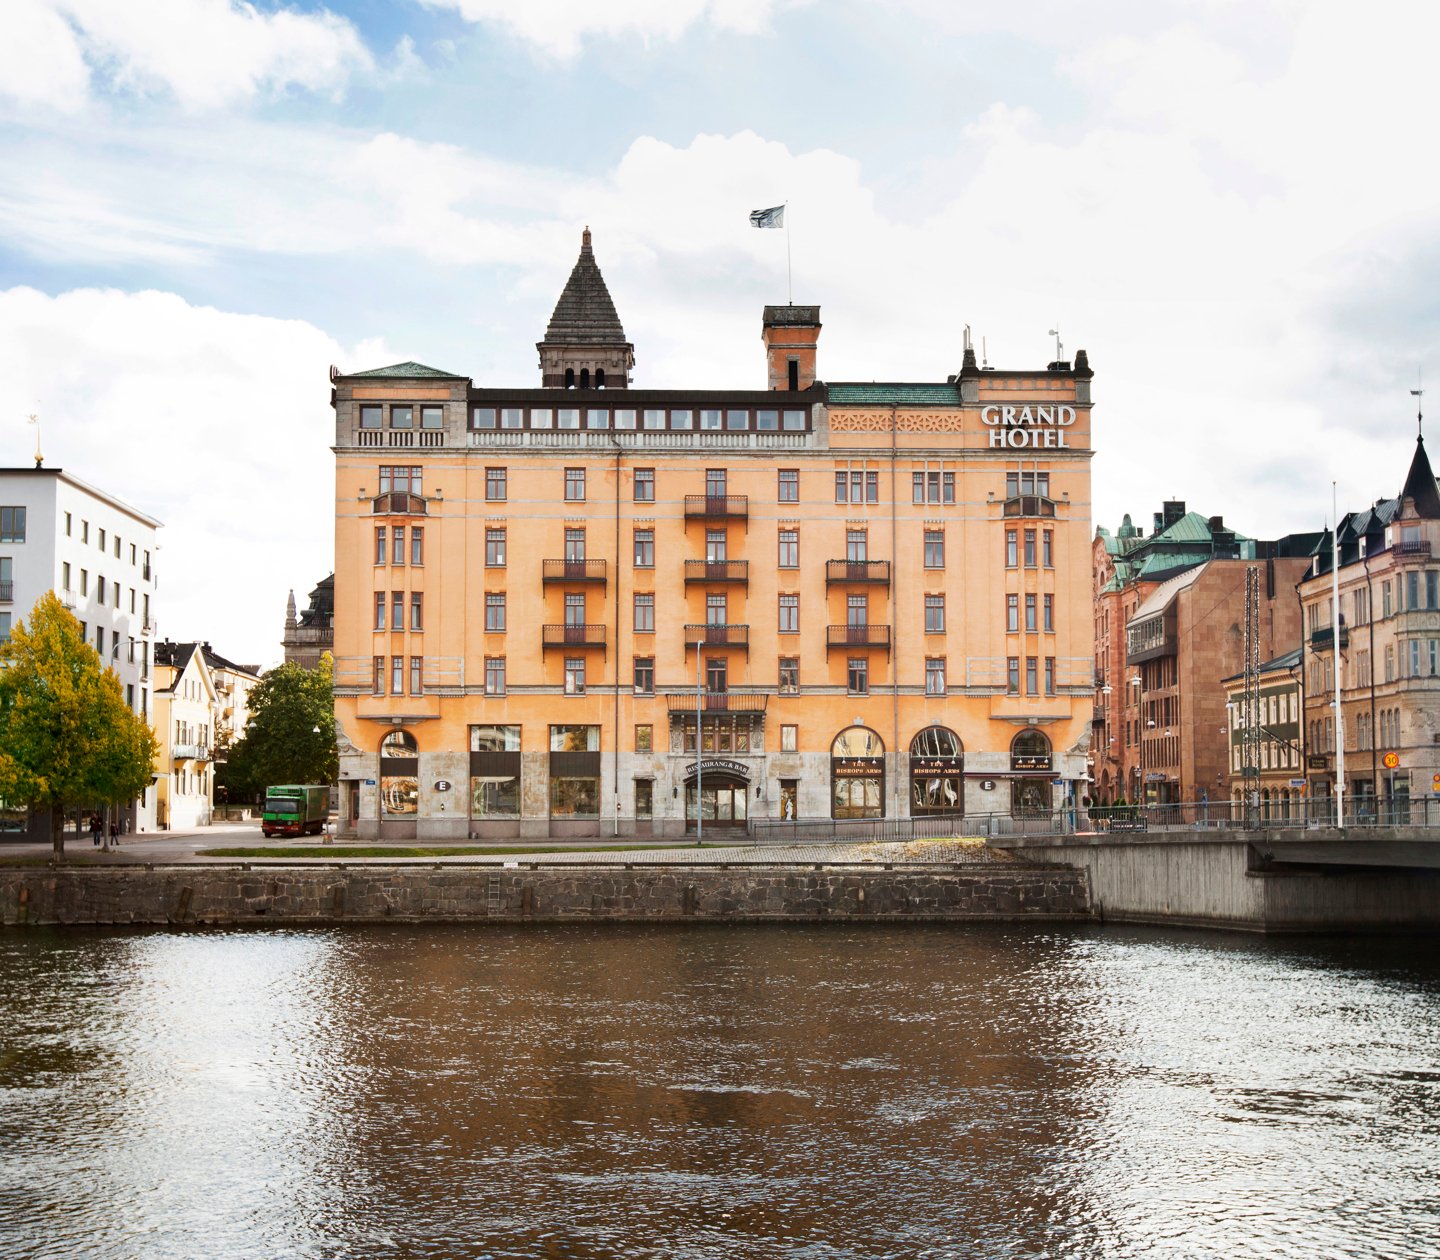 The facade at Elite Grand Hotel in Norrköping